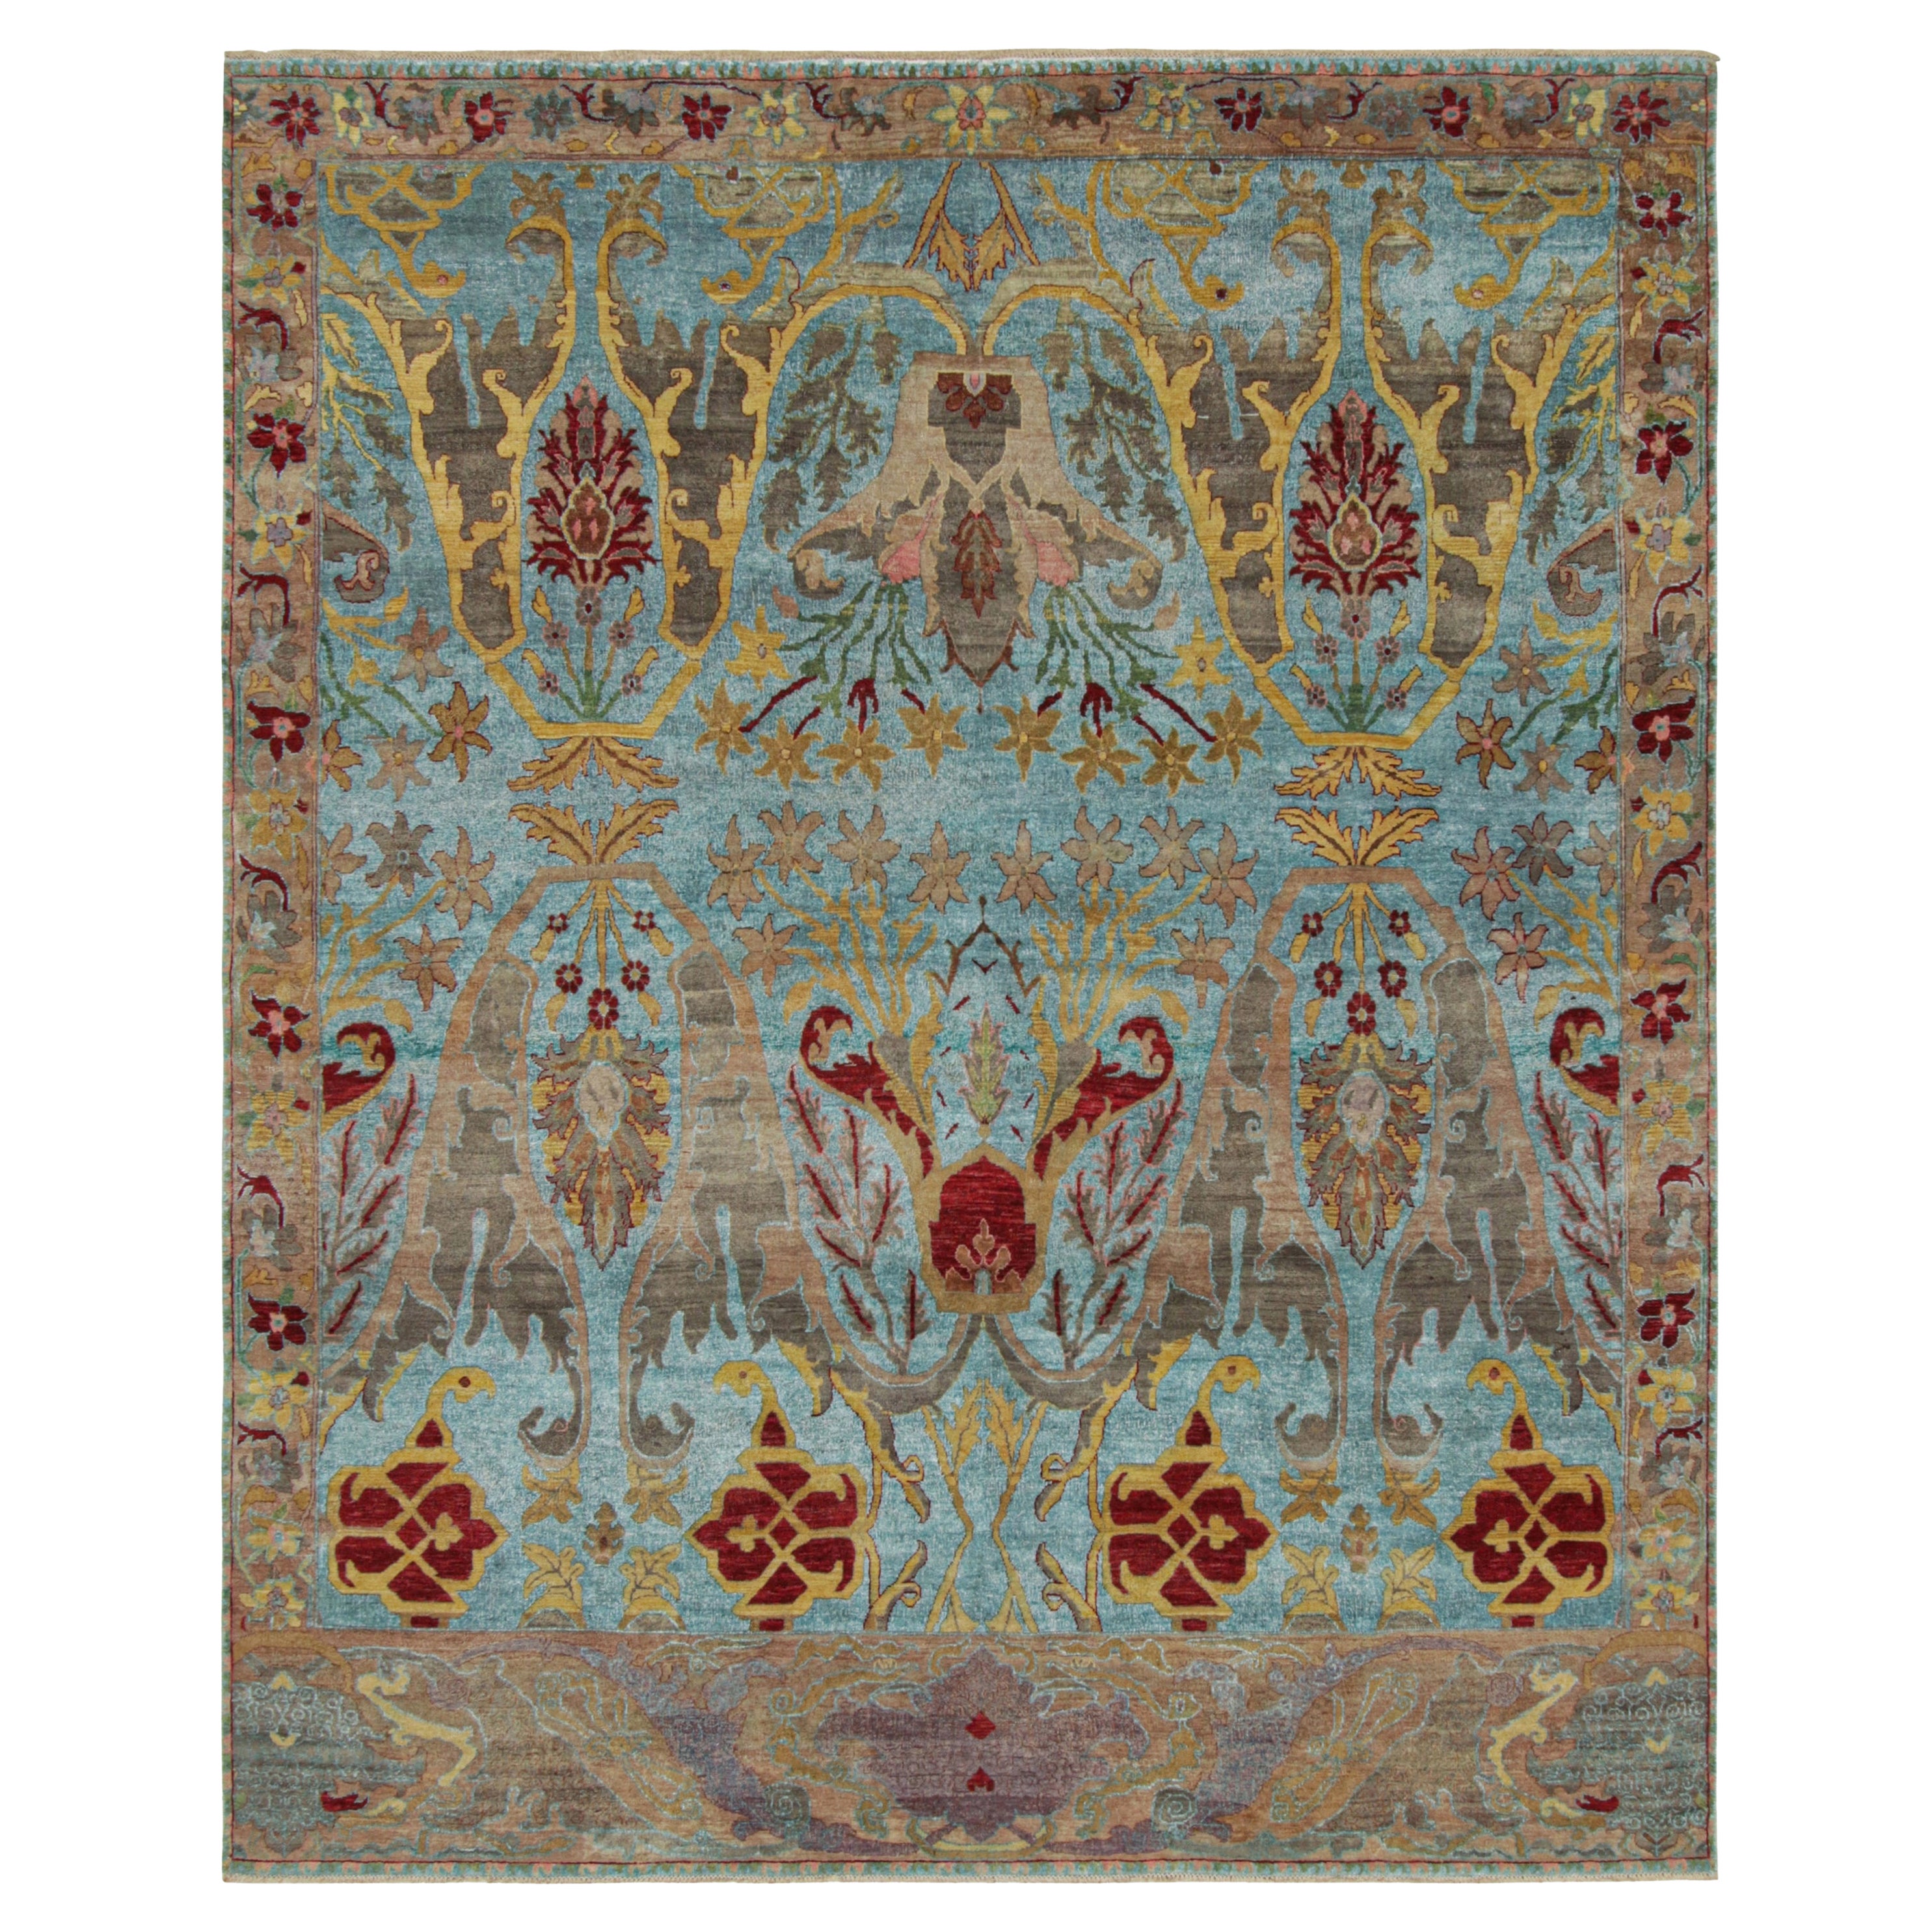 Rug & Kilim’s Oushak Style Rug in Blue with Polychromatic Floral Patterns